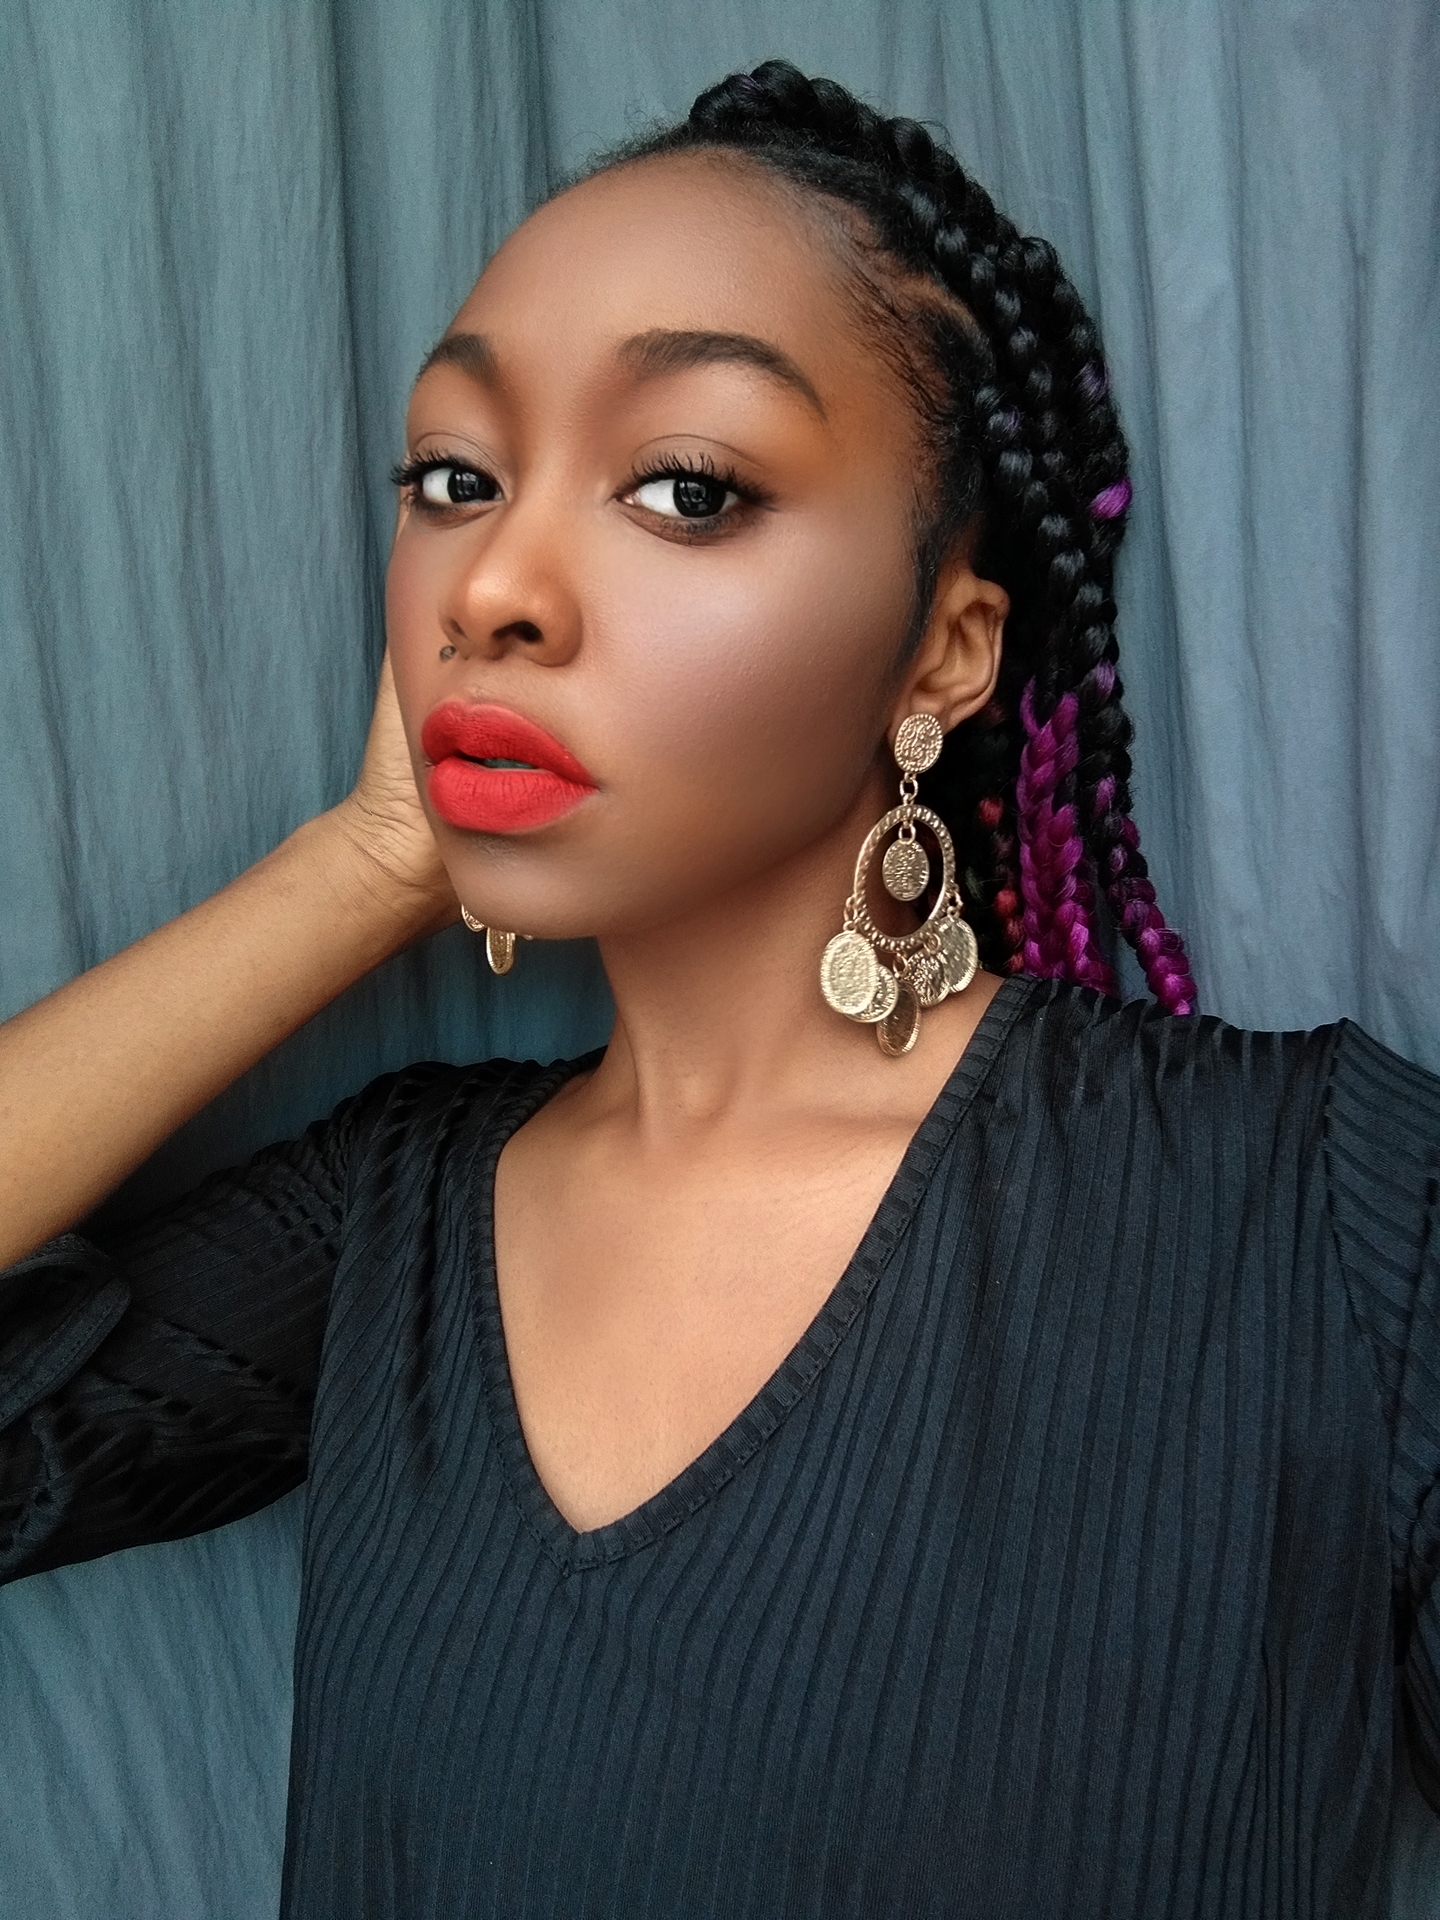 Why are braids a protective hairstyle?